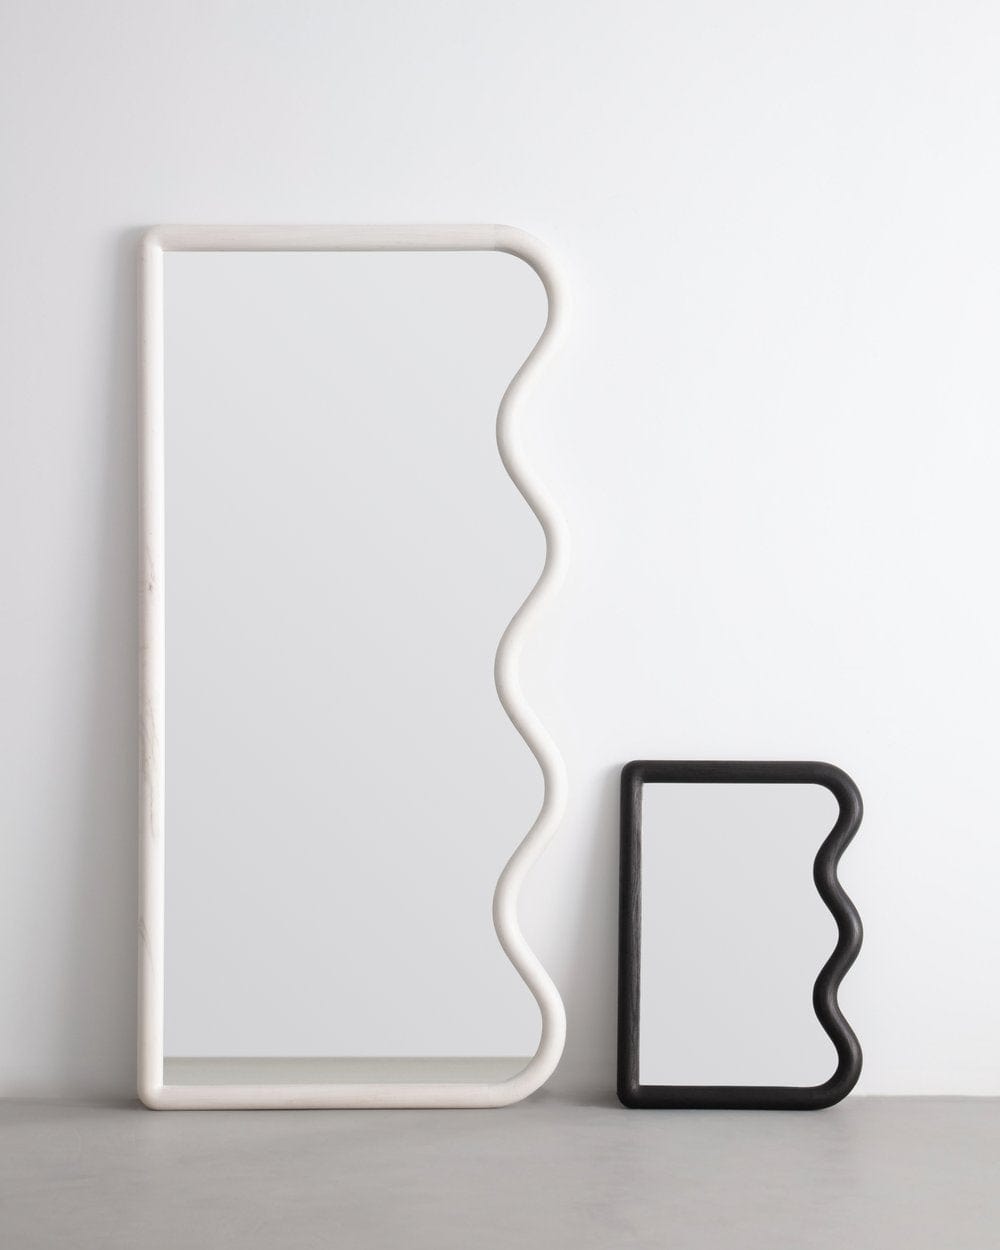 SQUIGGLE MIRROR BLEACHED MAPLE BY CHRISTOPHER MIANO